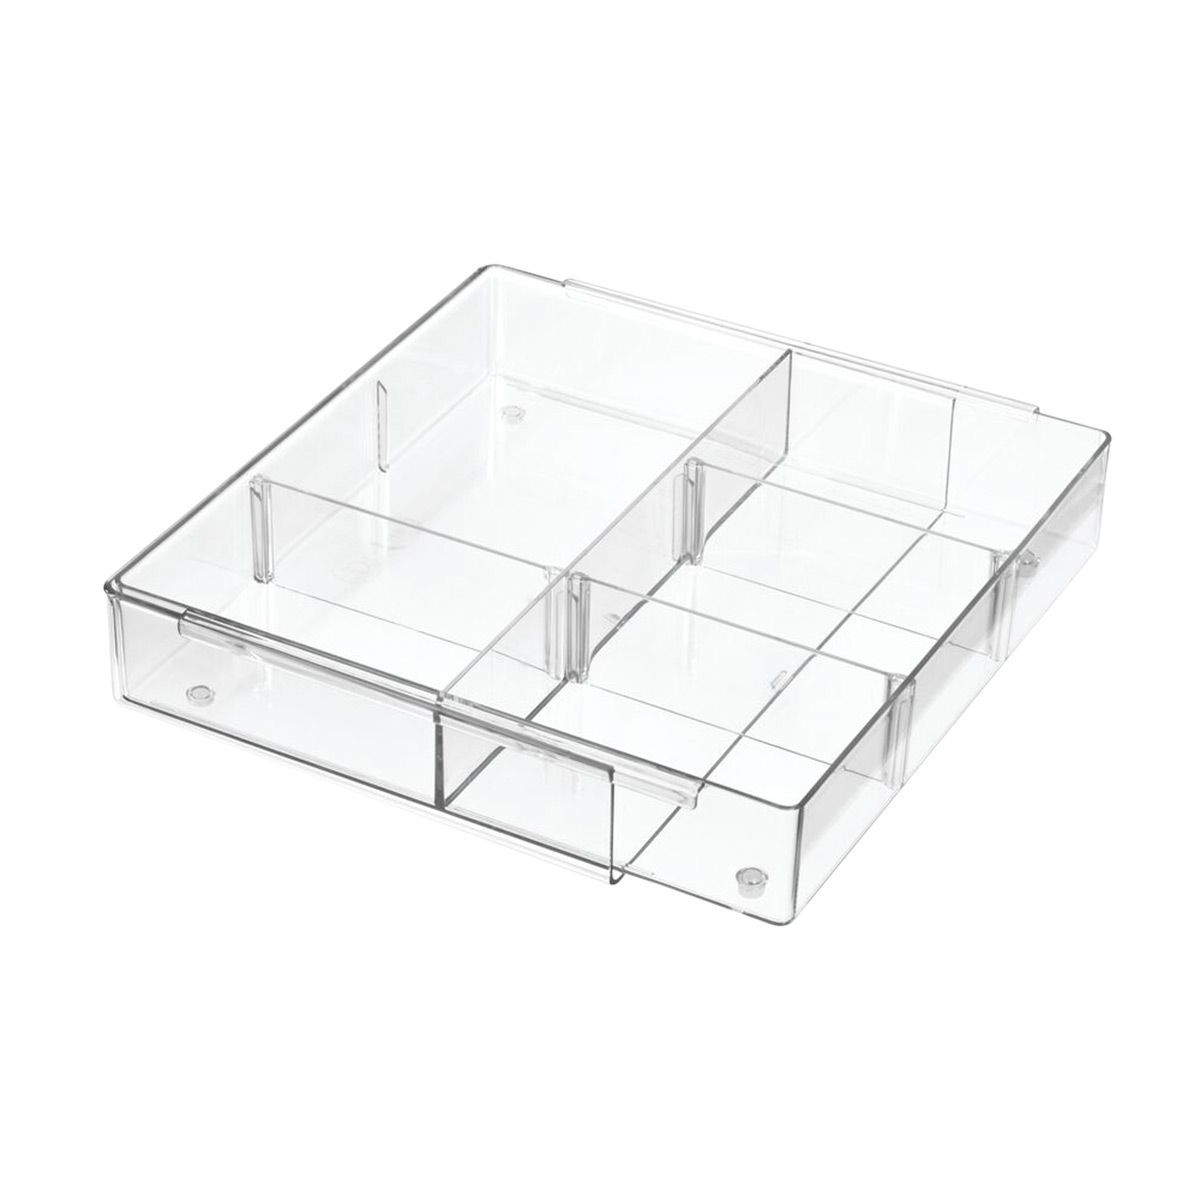 Drawer Organizer | The Container Store